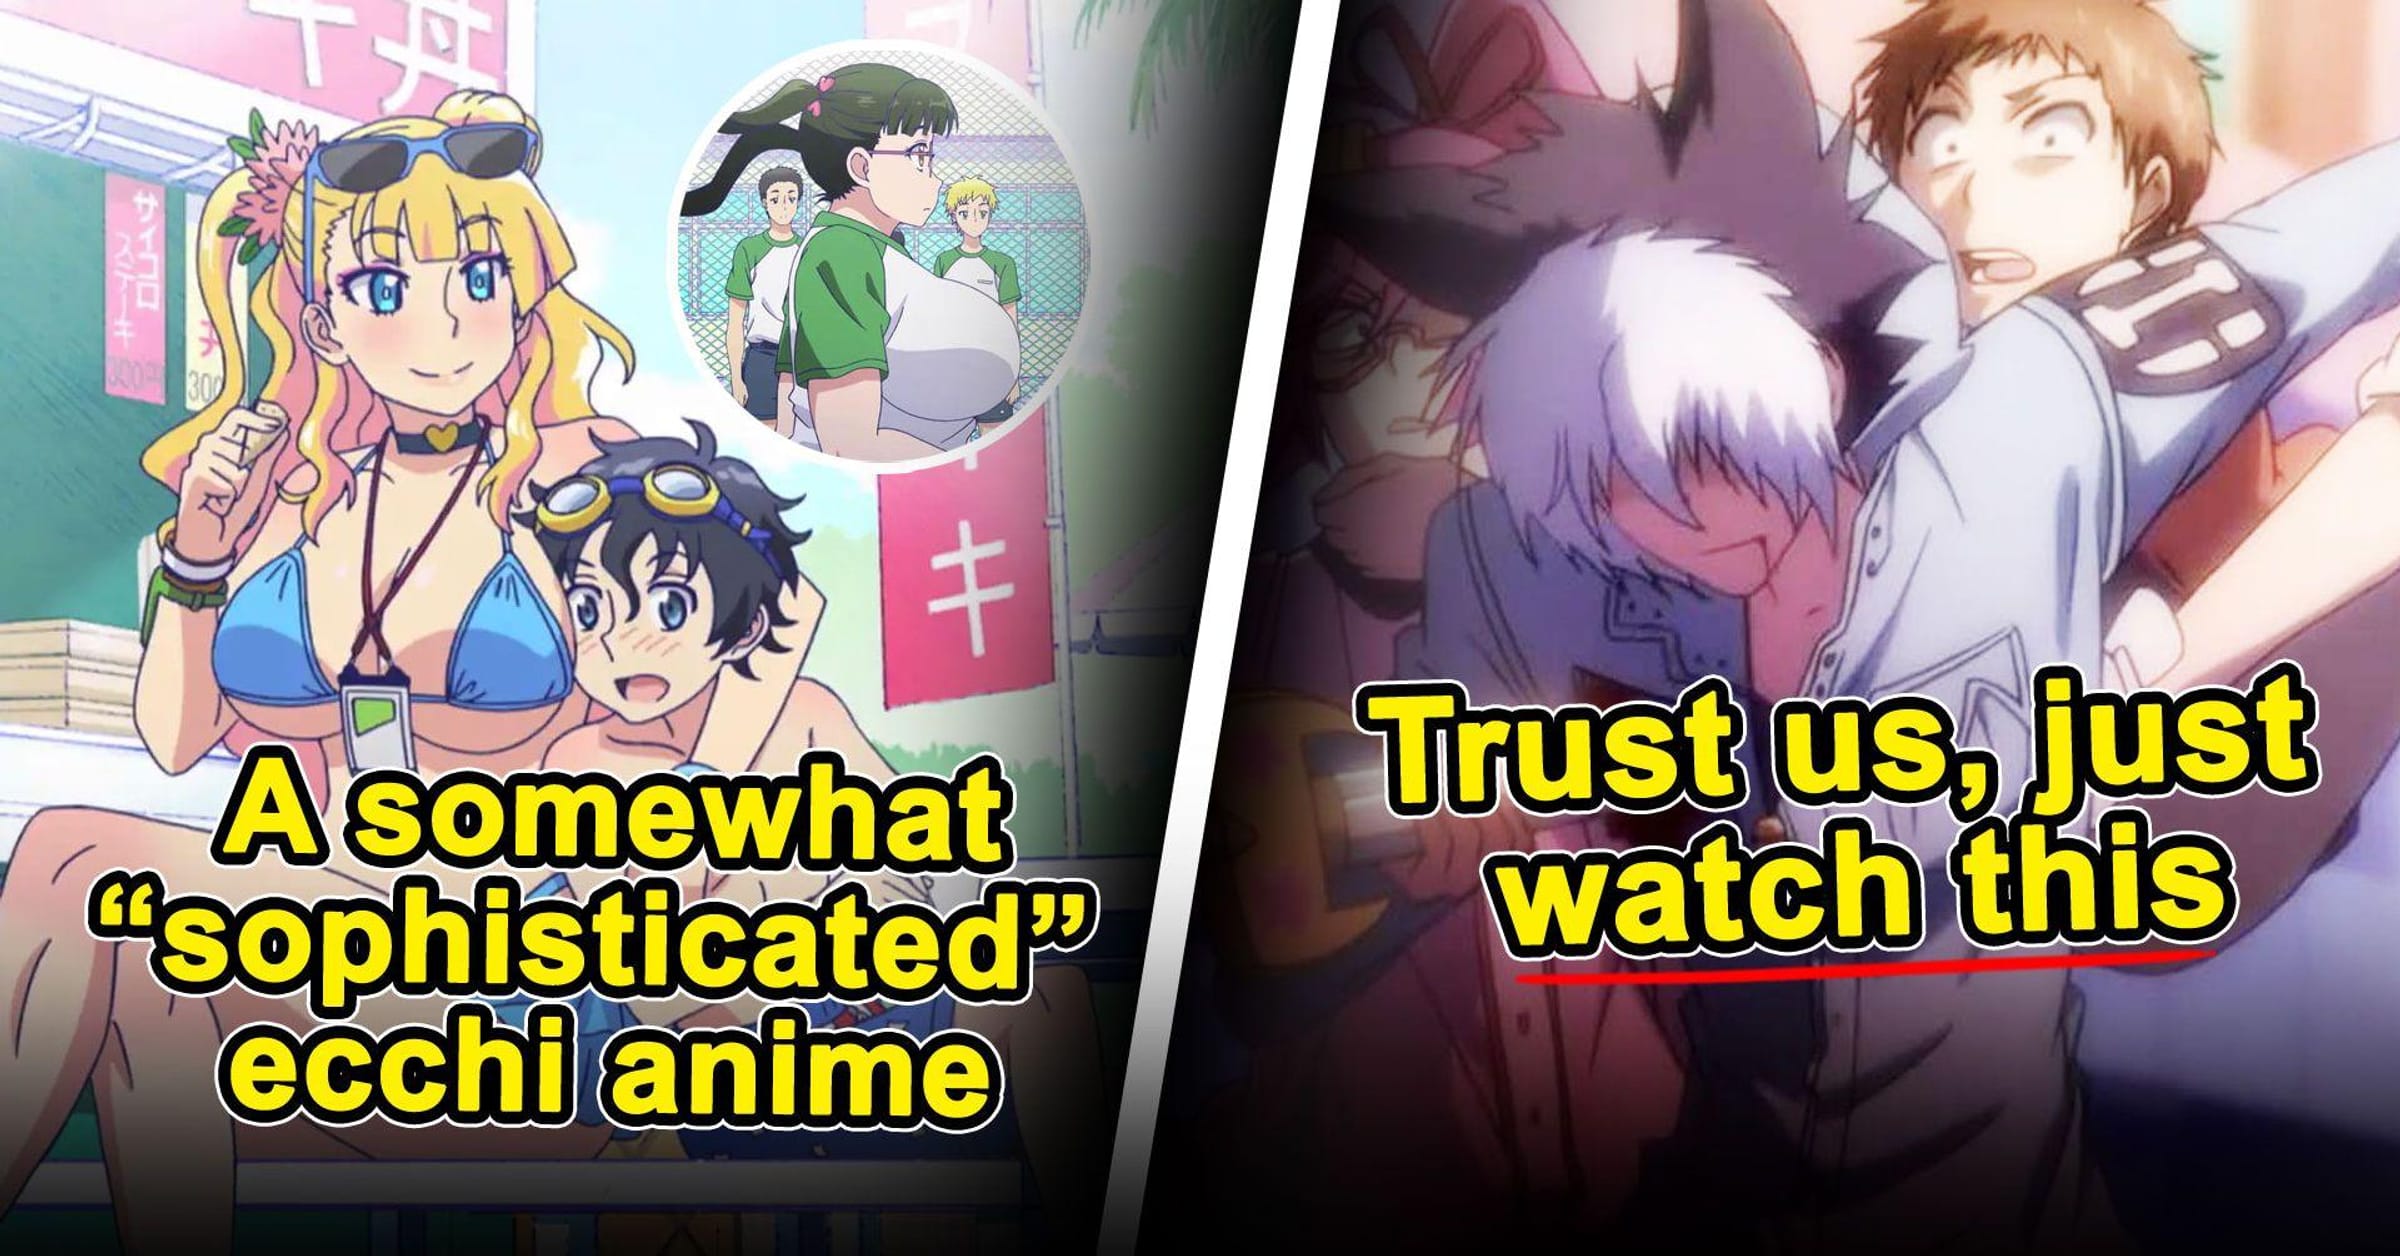 Popular anime I haven't seen. Which are actually worth watching